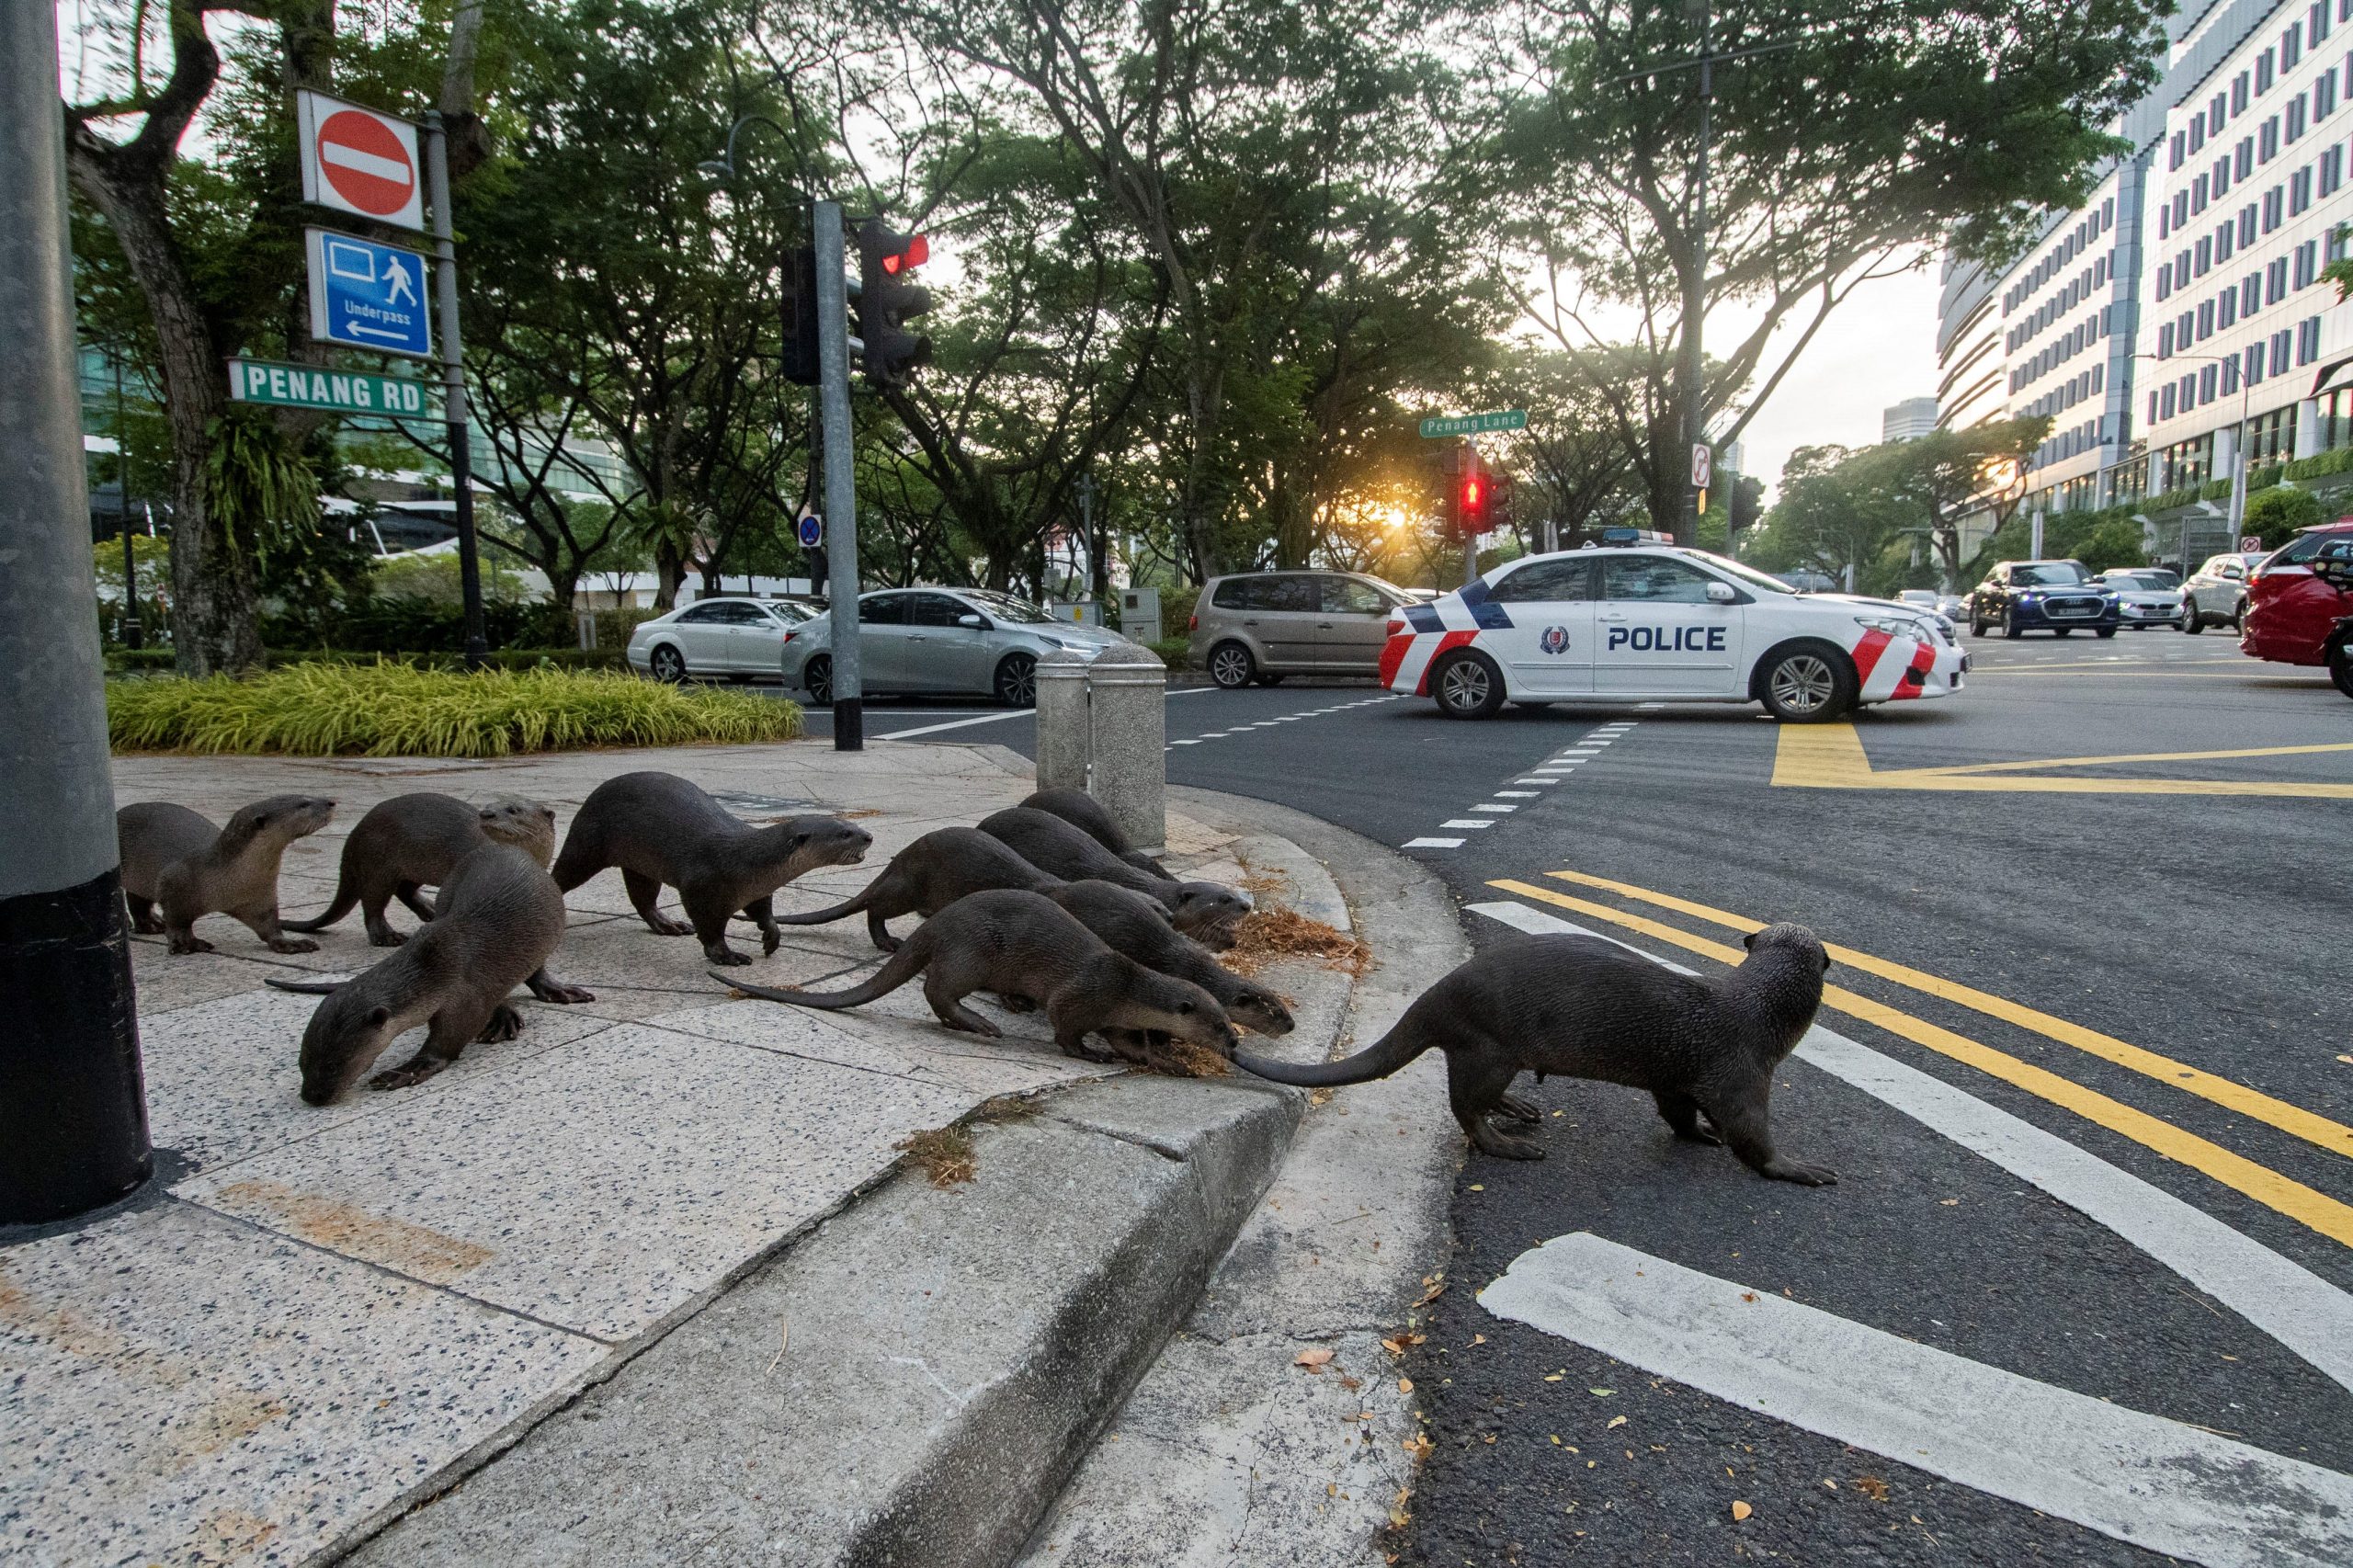 Pack of otters crossing a Singapore street intersection